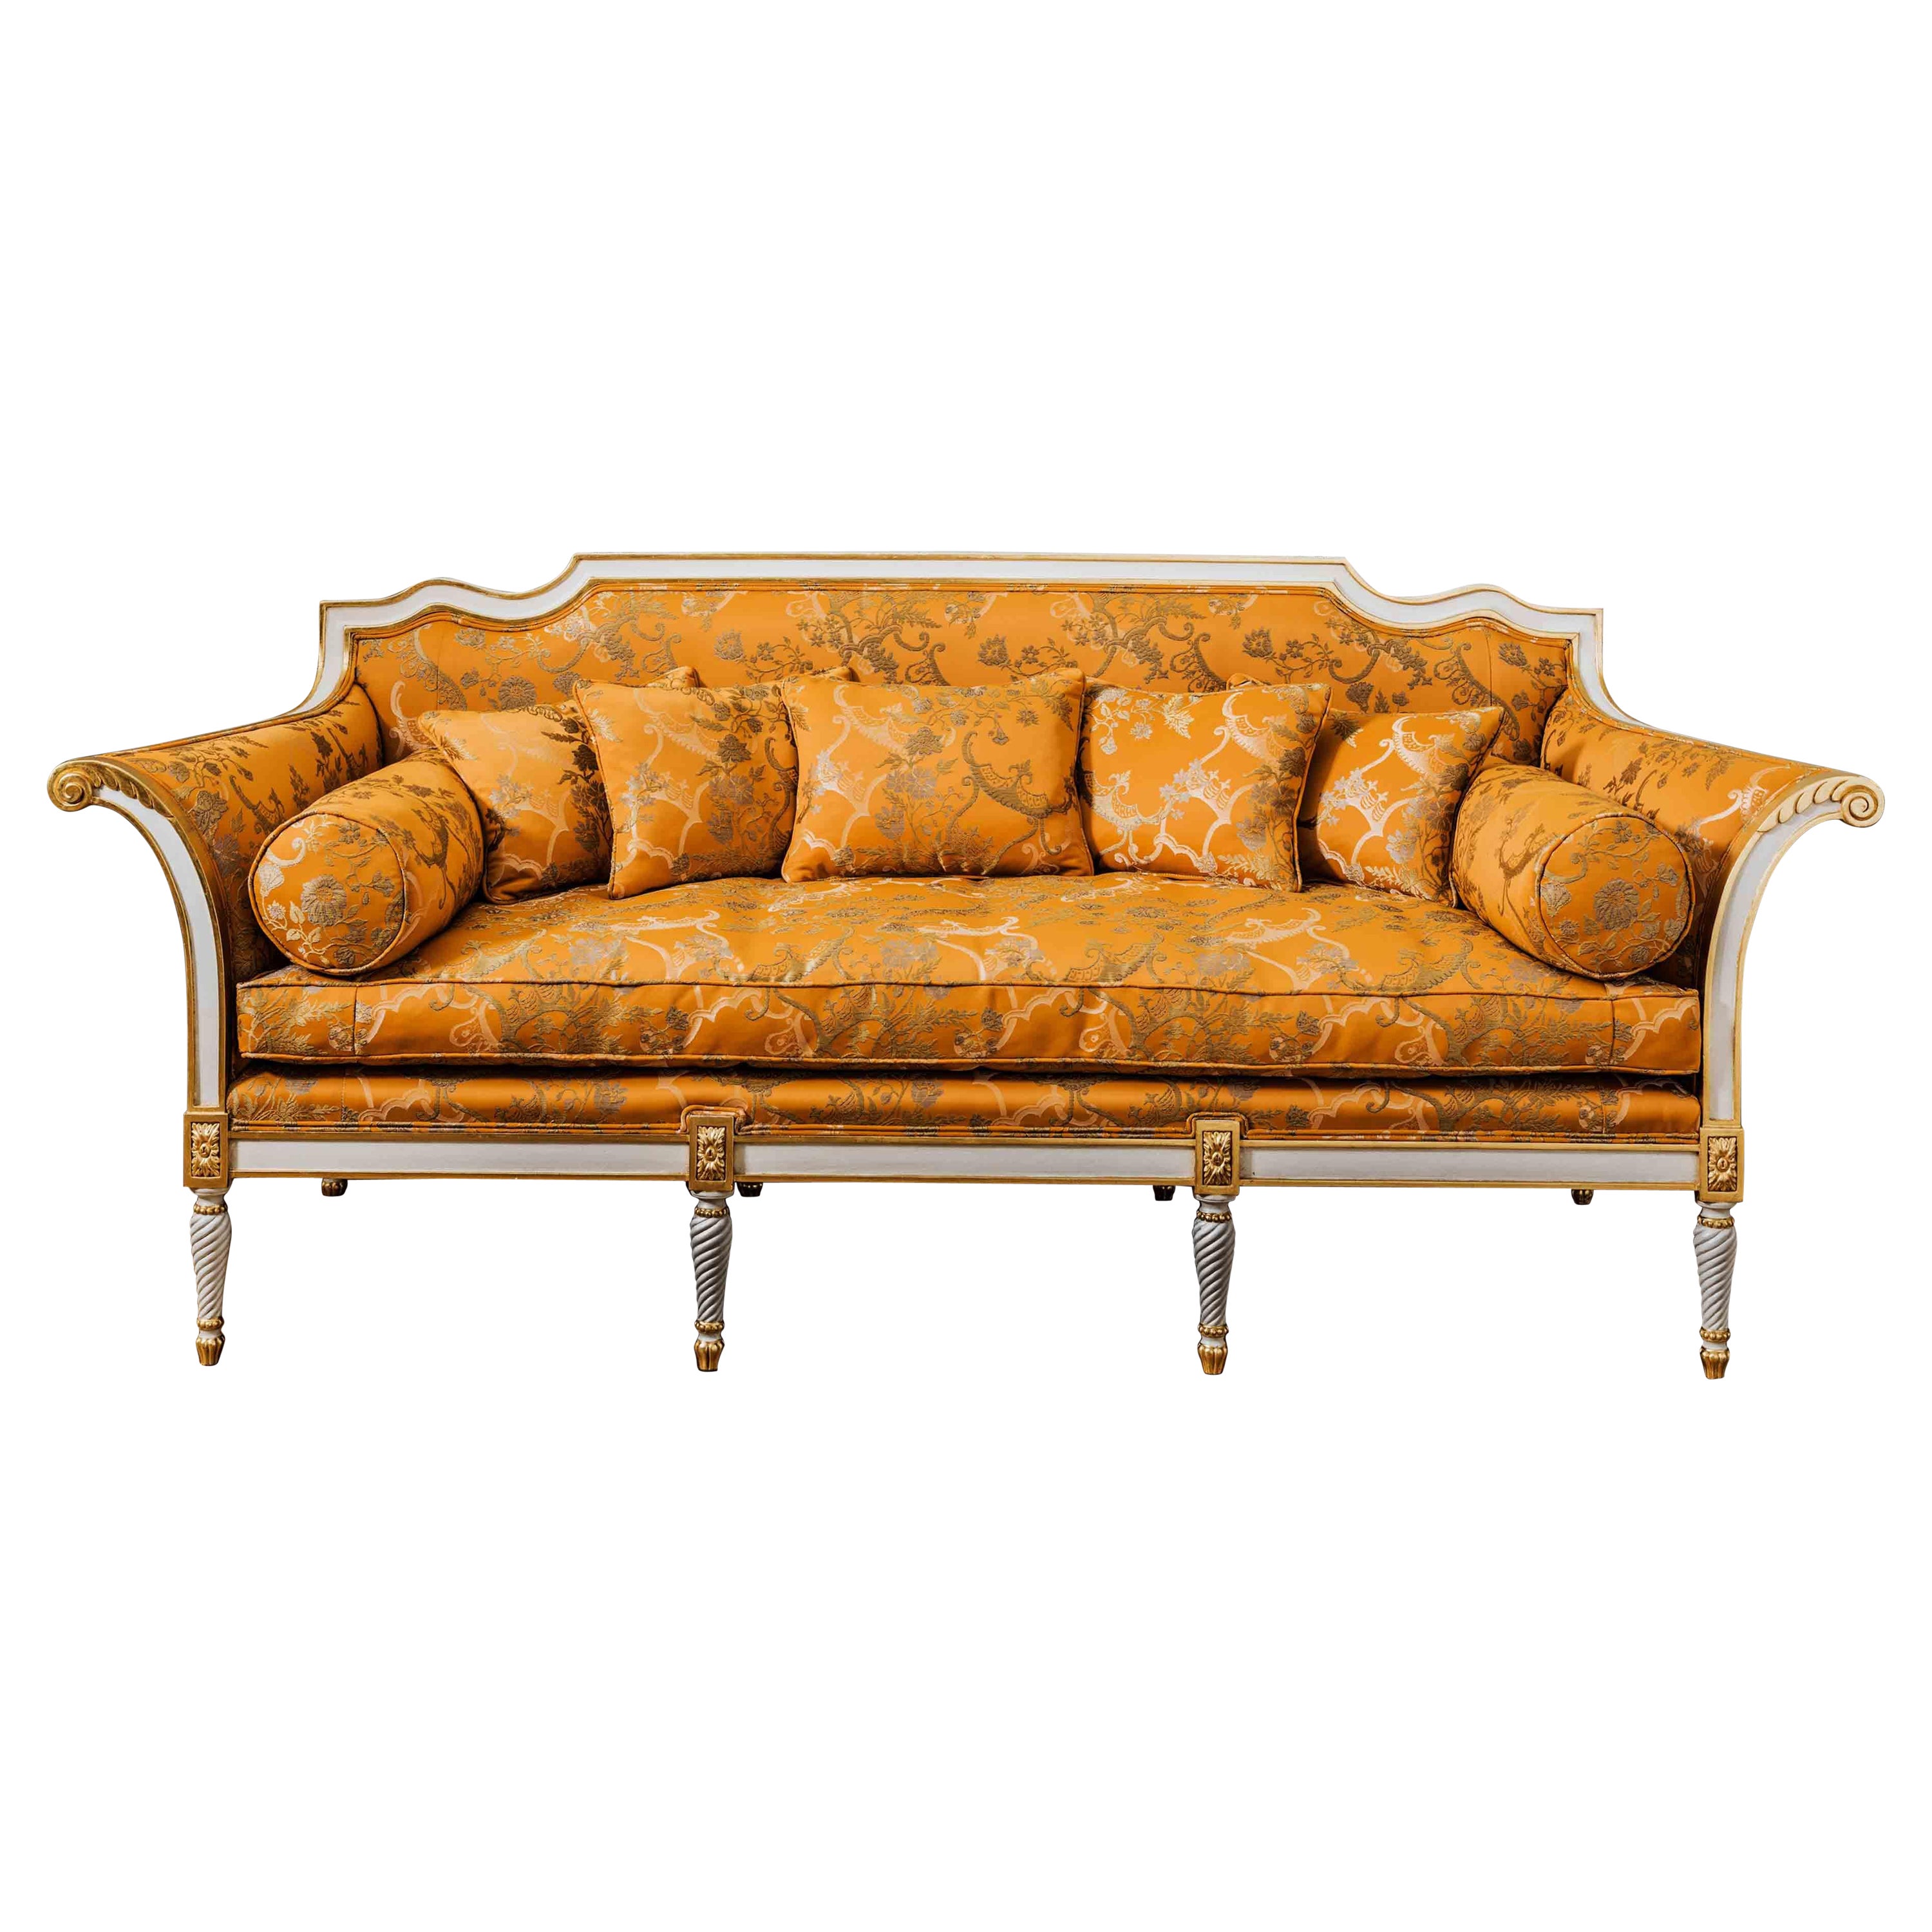 French Louis XVI Period Style Sofa with Scroll Arms Made by La Maison london For Sale